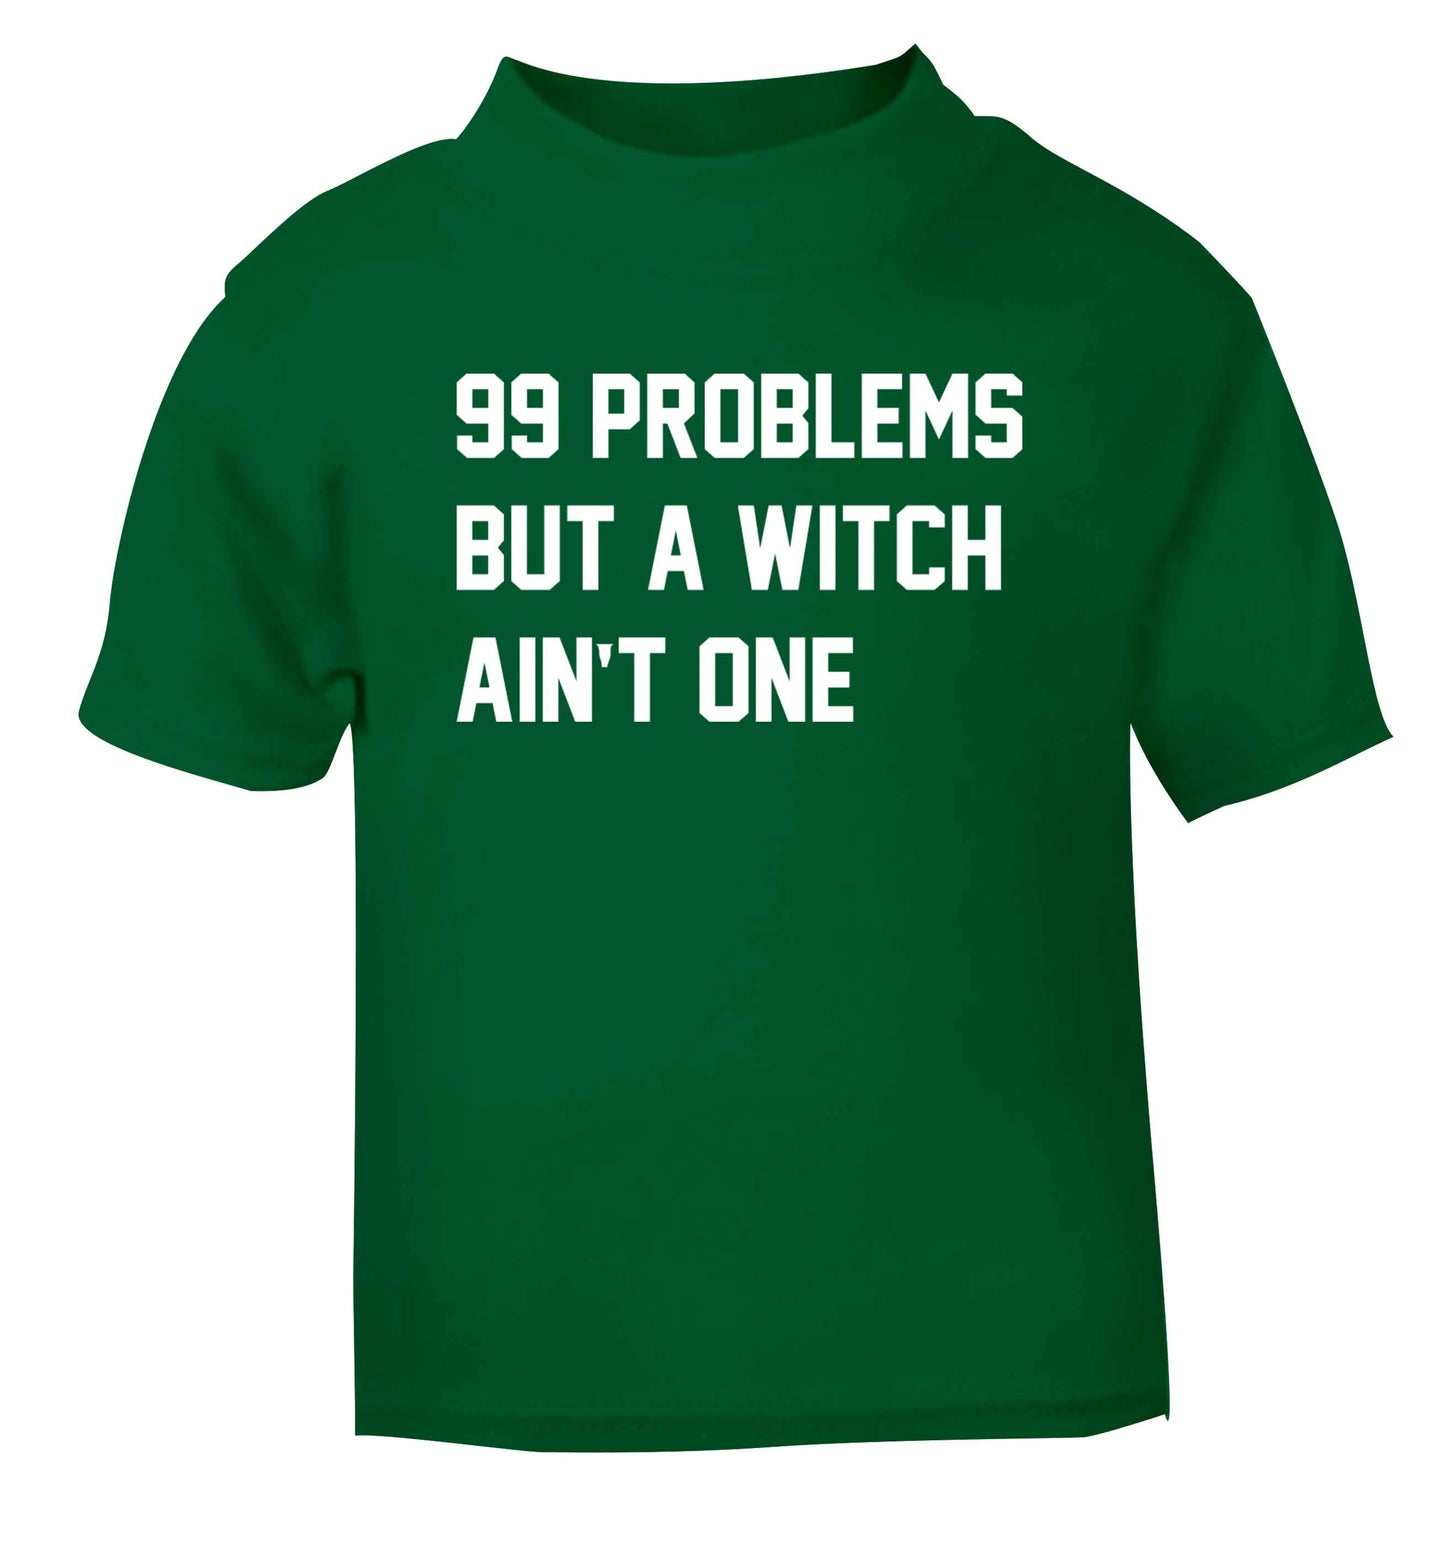 99 Problems but a witch aint one green baby toddler Tshirt 2 Years